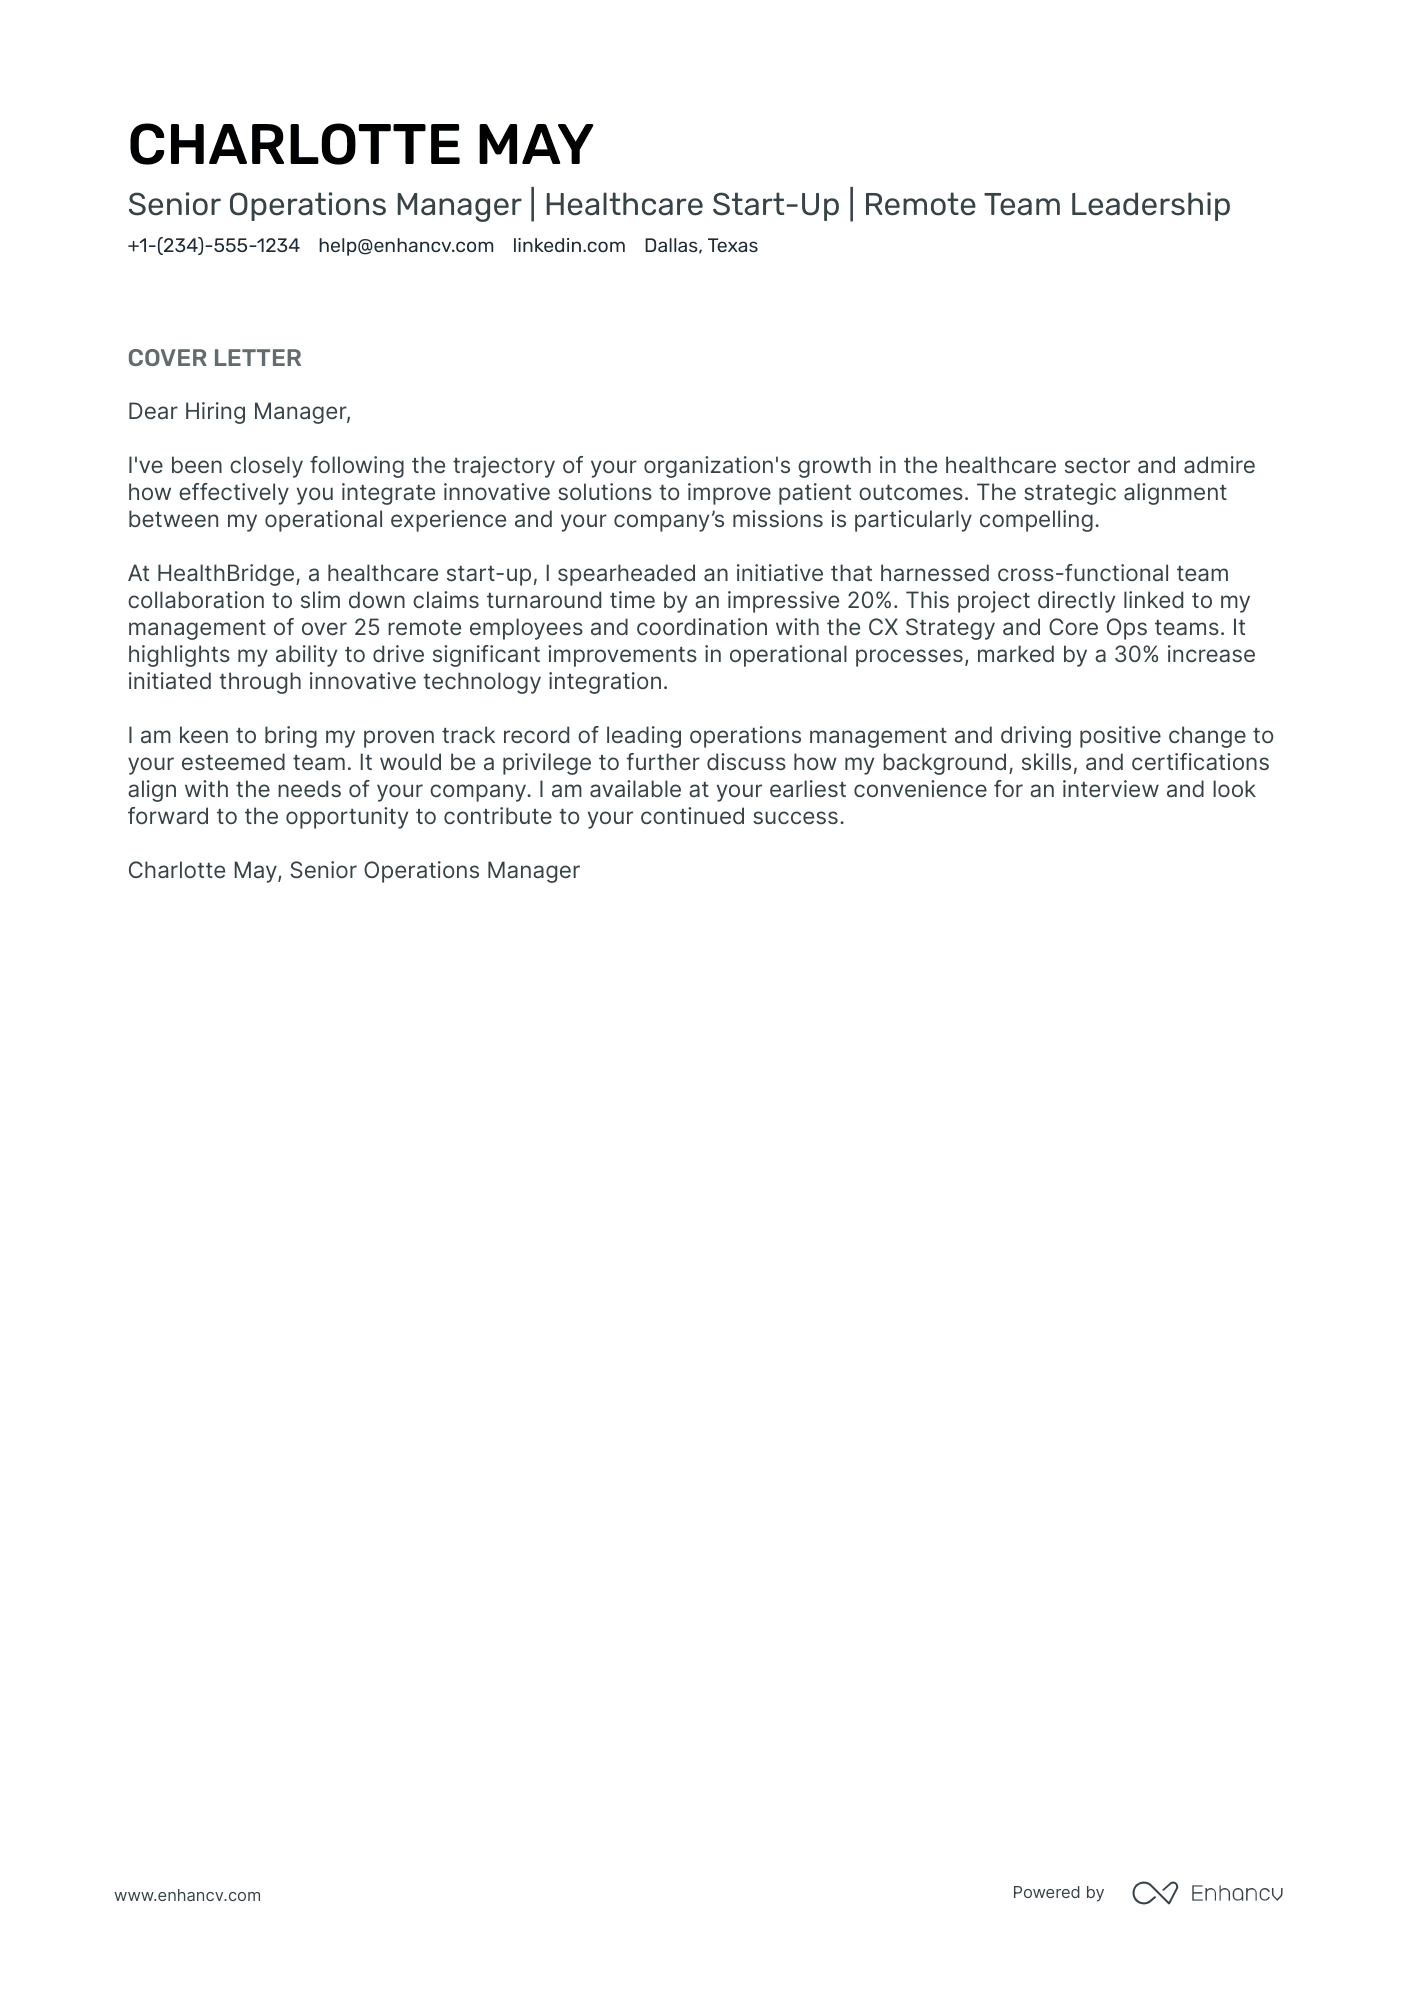 operations manager cover letter example